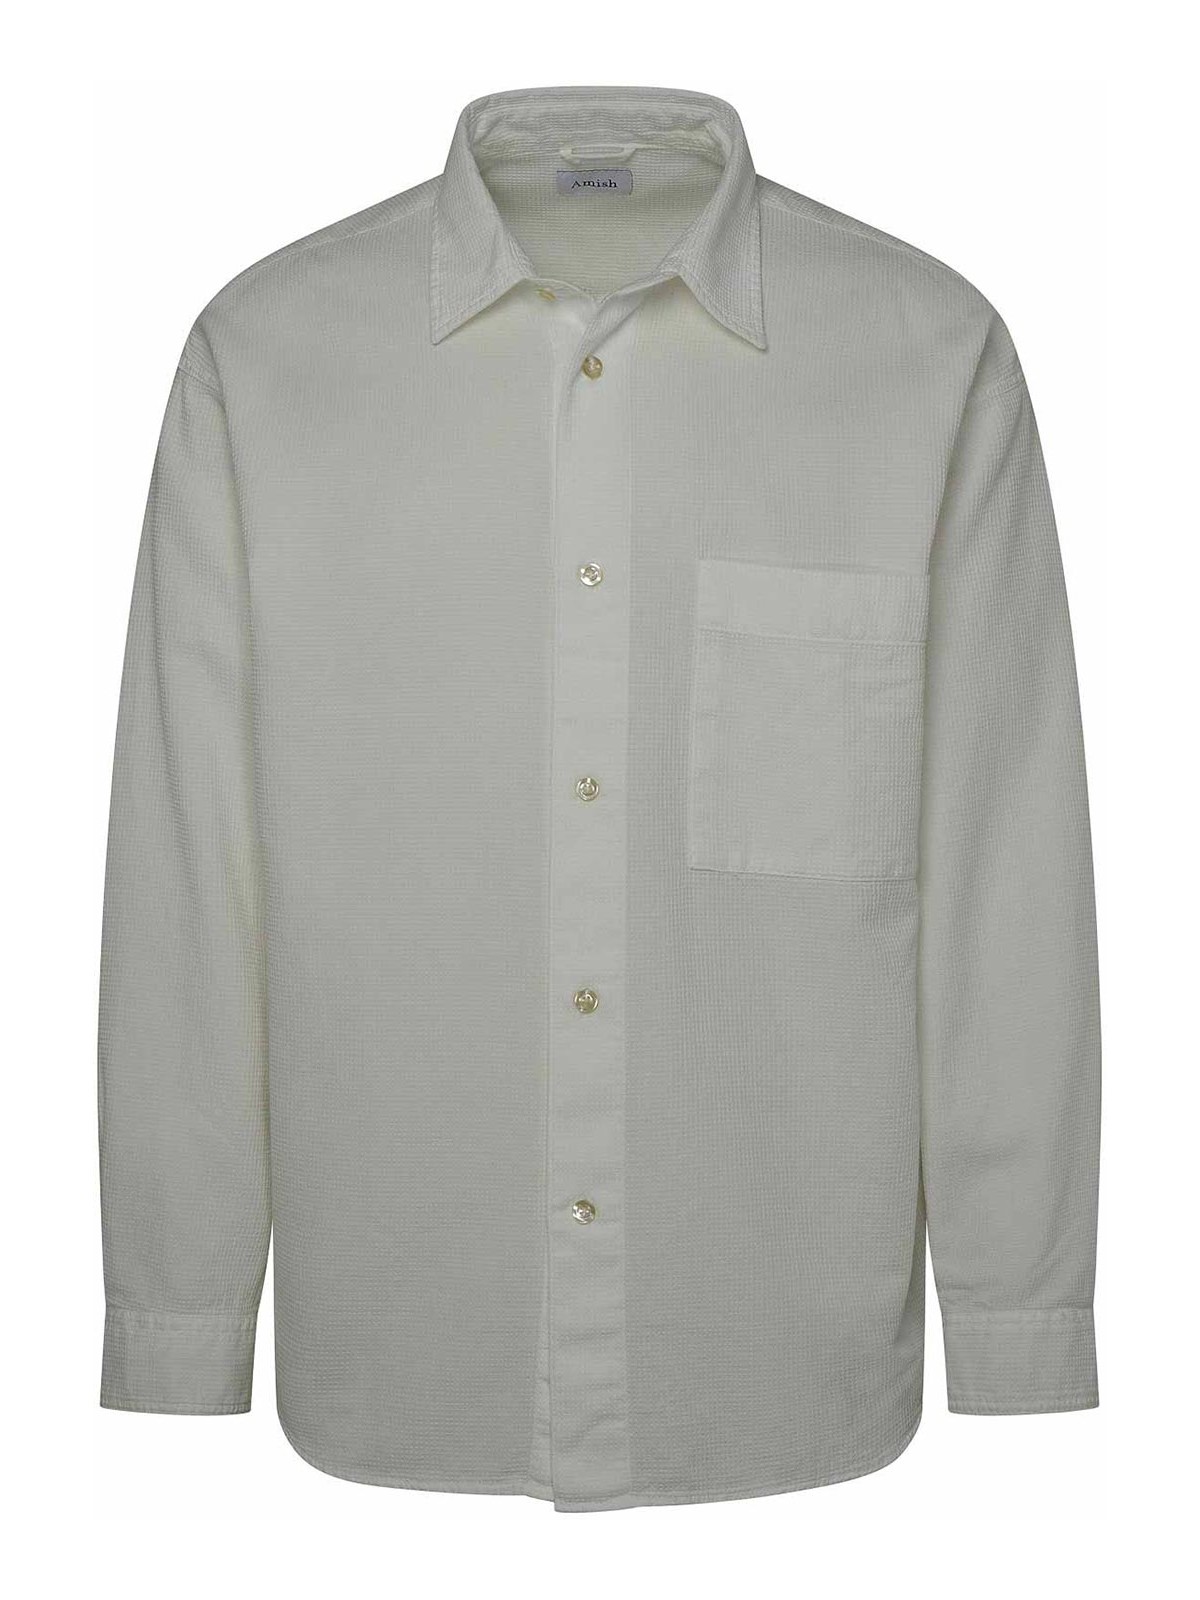 Amish Cotton Shirt In White